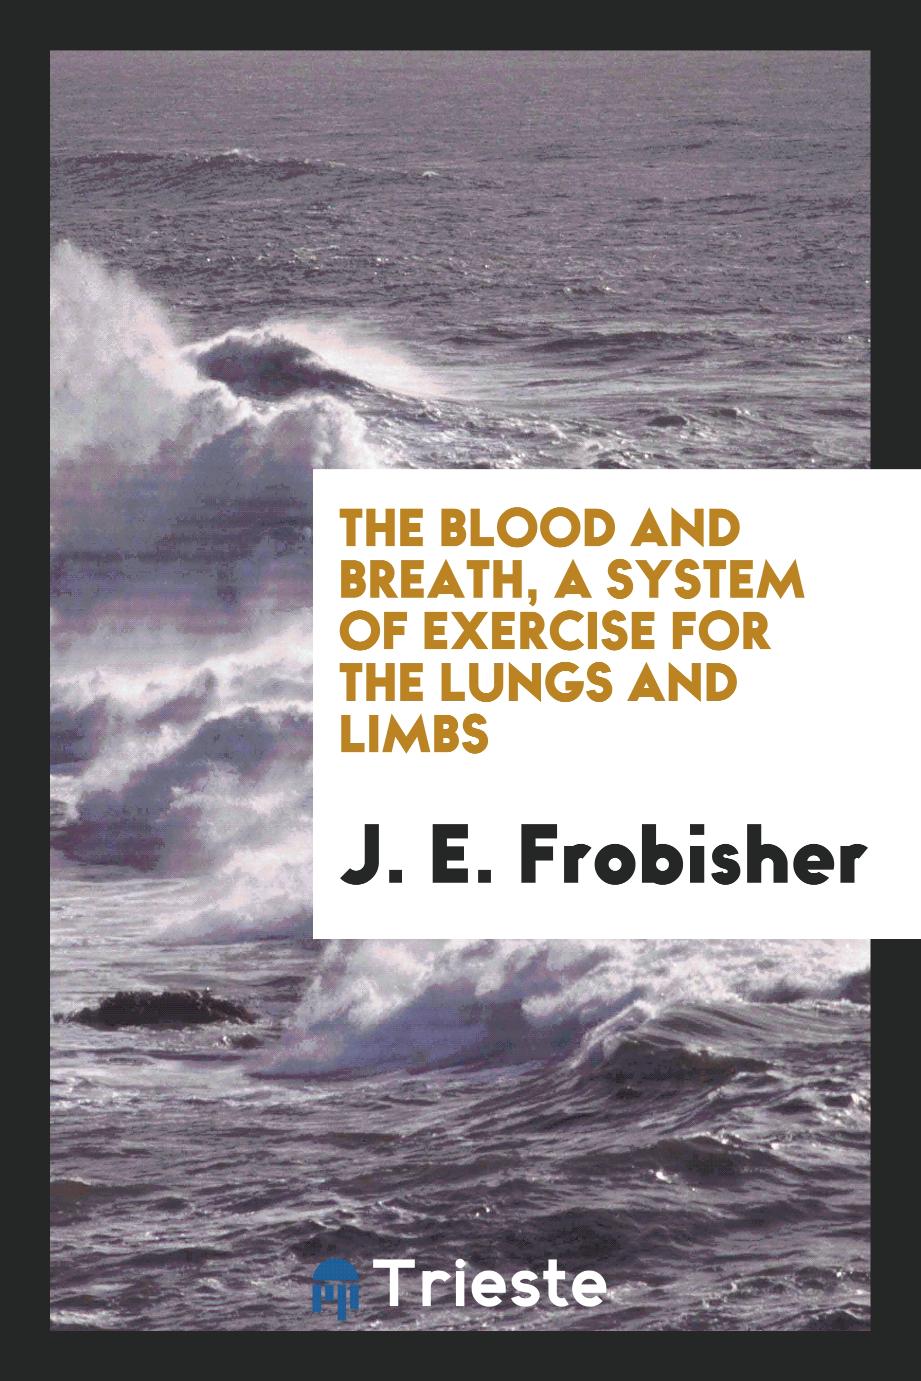 The Blood and Breath, a System of Exercise for the Lungs and Limbs